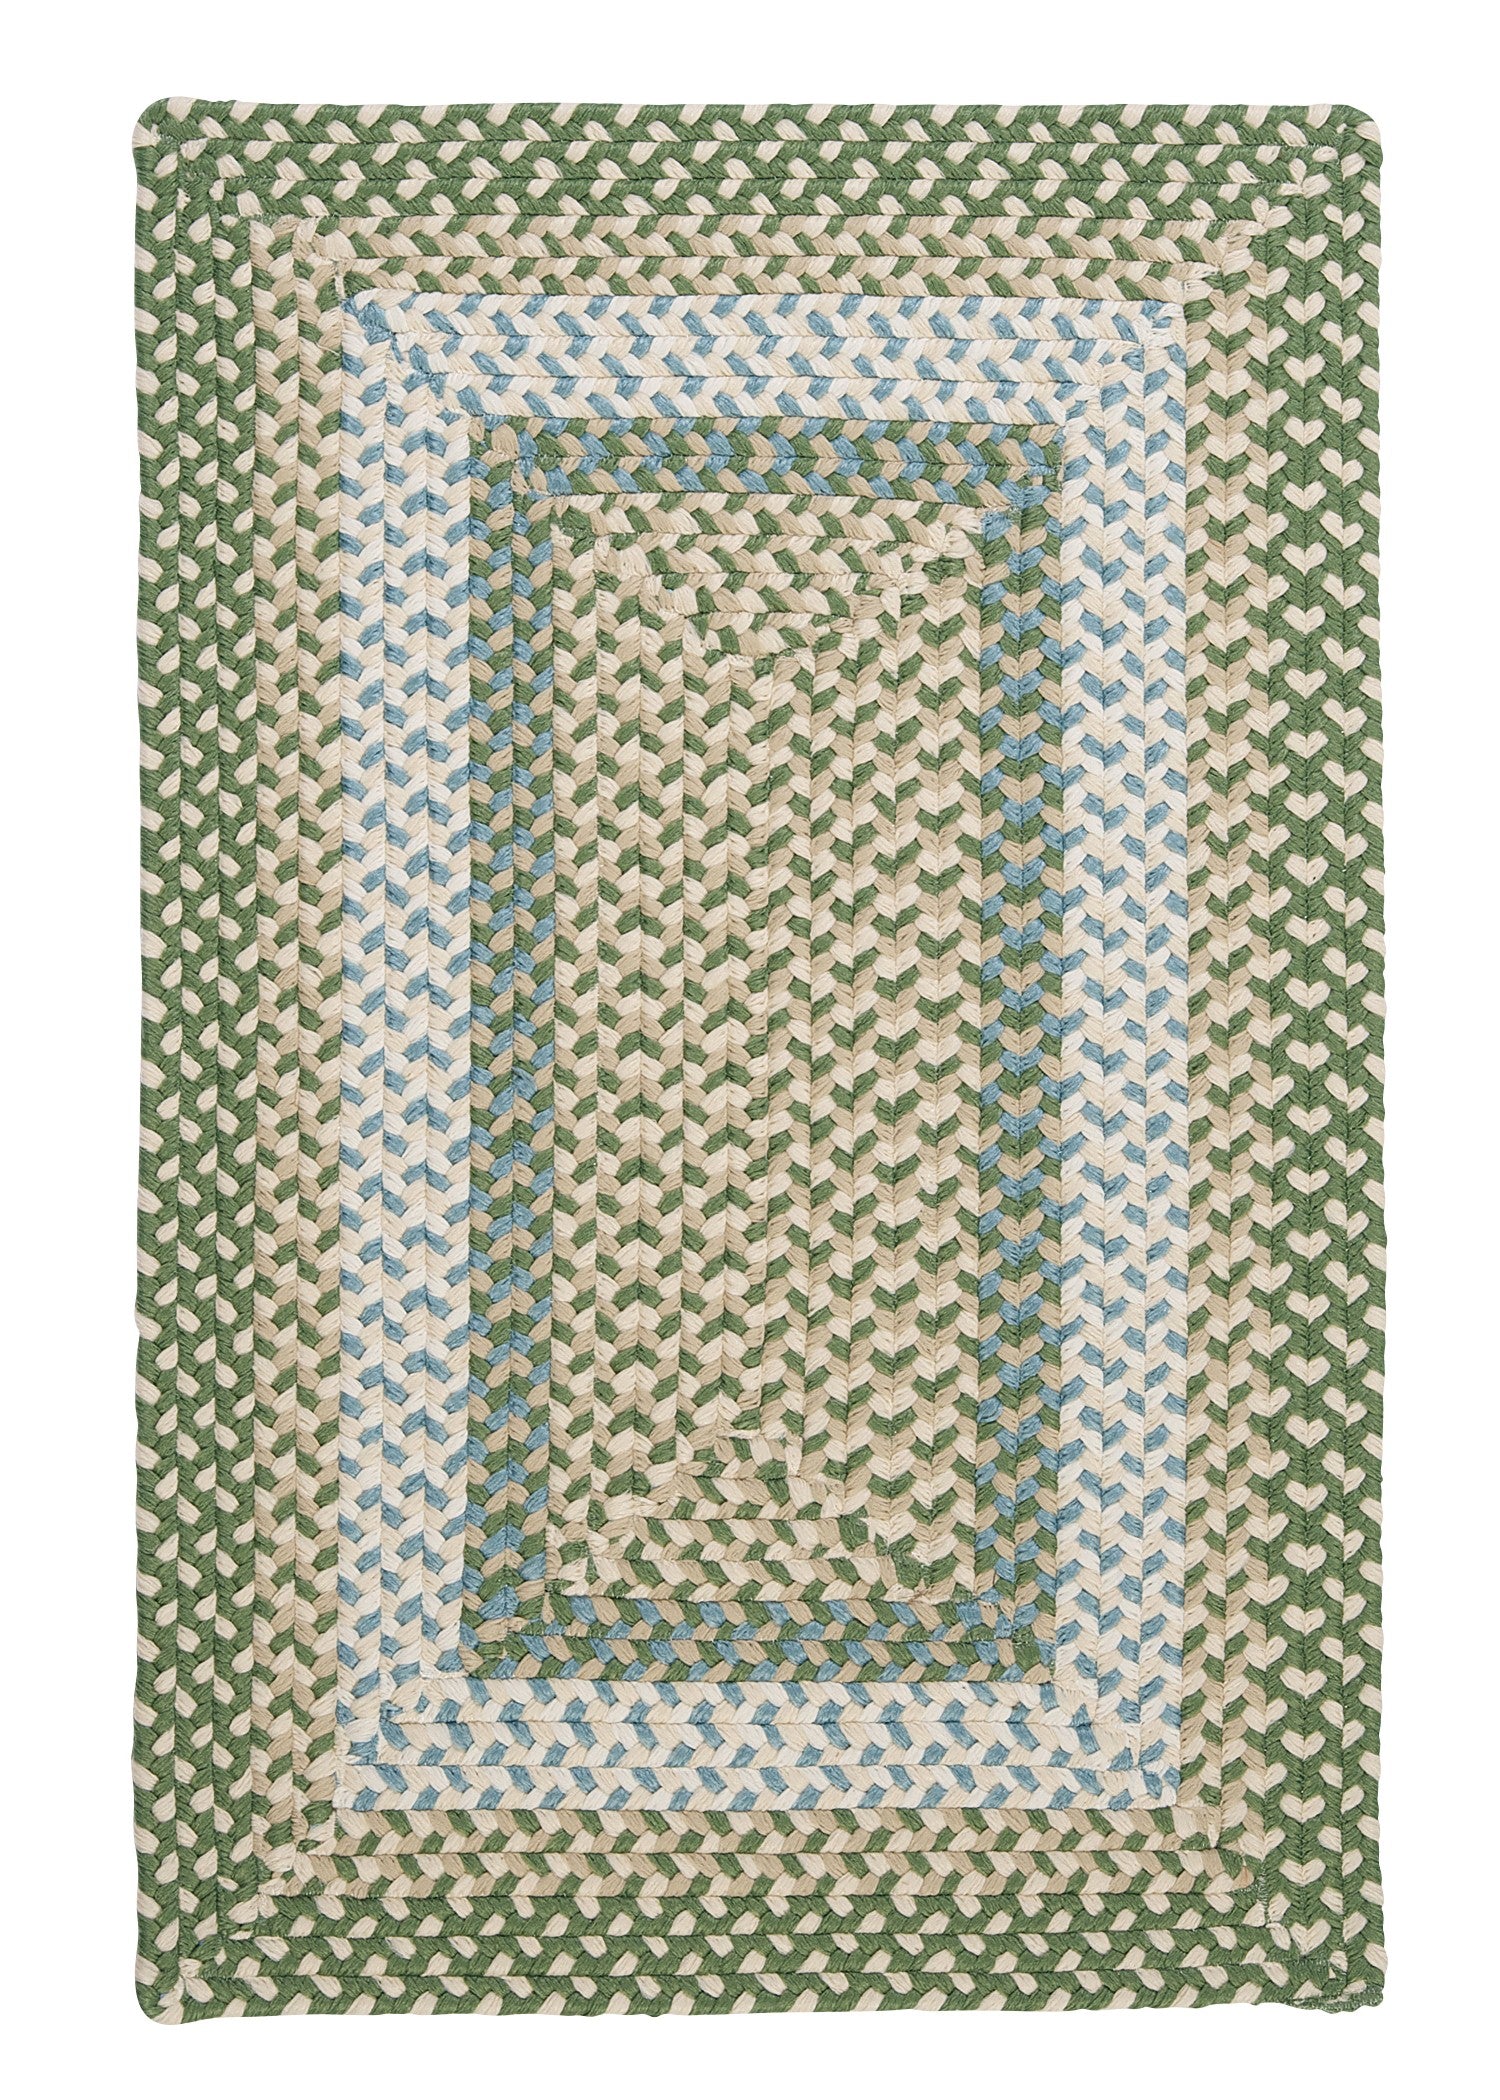 Colonial Mills Montego MG19 Lily Pad Green Indoor/Outdoor Area Rug